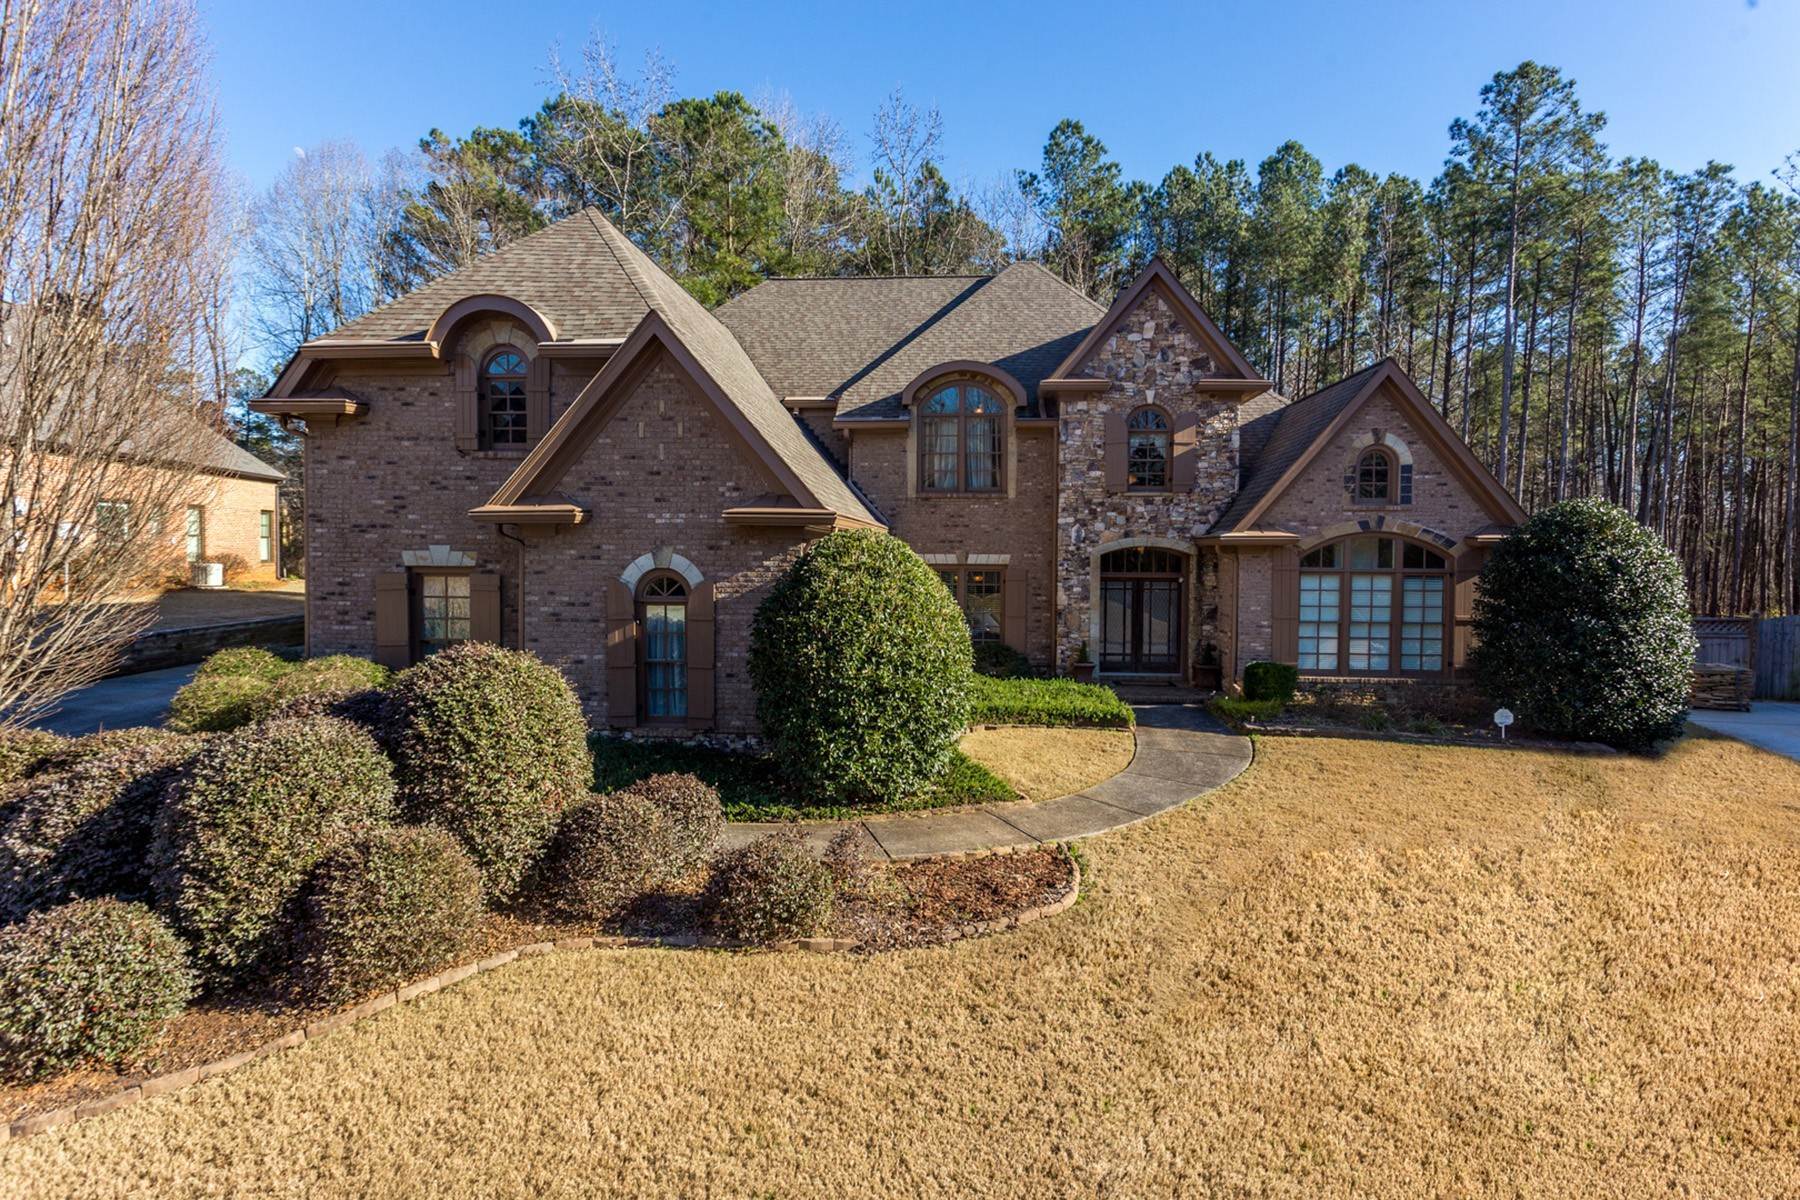 Single Family Homes for Sale at Stunning Brick and Stone Located in Hawthorne at Lost Mountain 1115 Meadow Grass Lane Powder Springs, Georgia 30127 United States